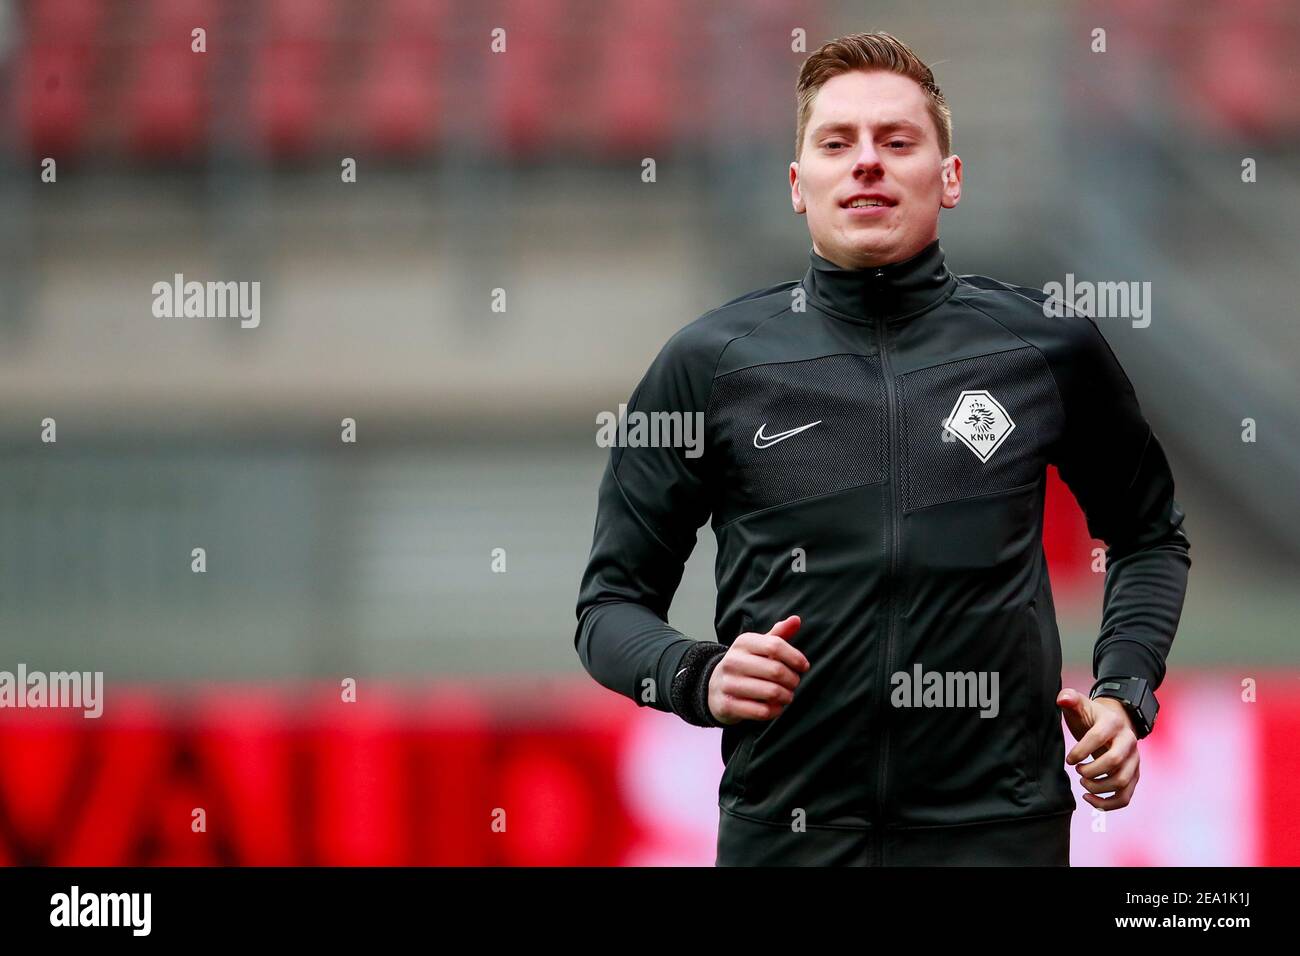 MAASTRICHT, NETHERLANDS - FEBRUARY 6: Assistant Referee Marco Ribbink during the Dutch Keukenkampioendivisie match between MVV and NEC at De Geusselt Stock Photo